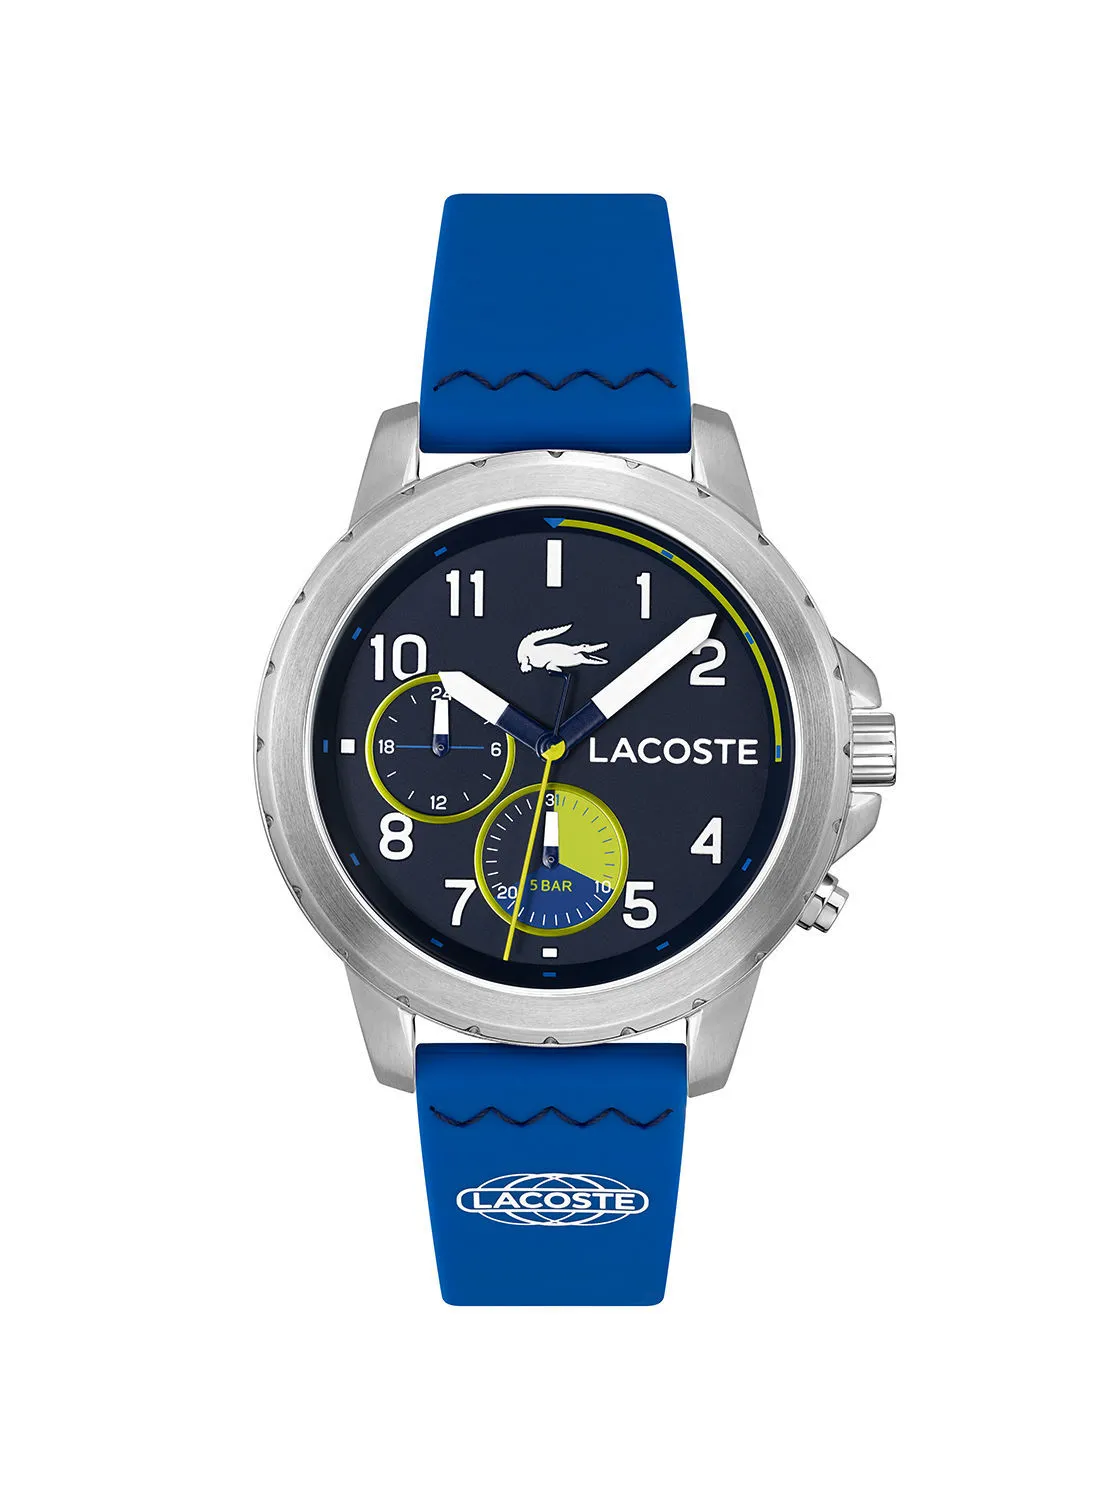 LACOSTE Endurance Men'S Silicone Watch - 2011205